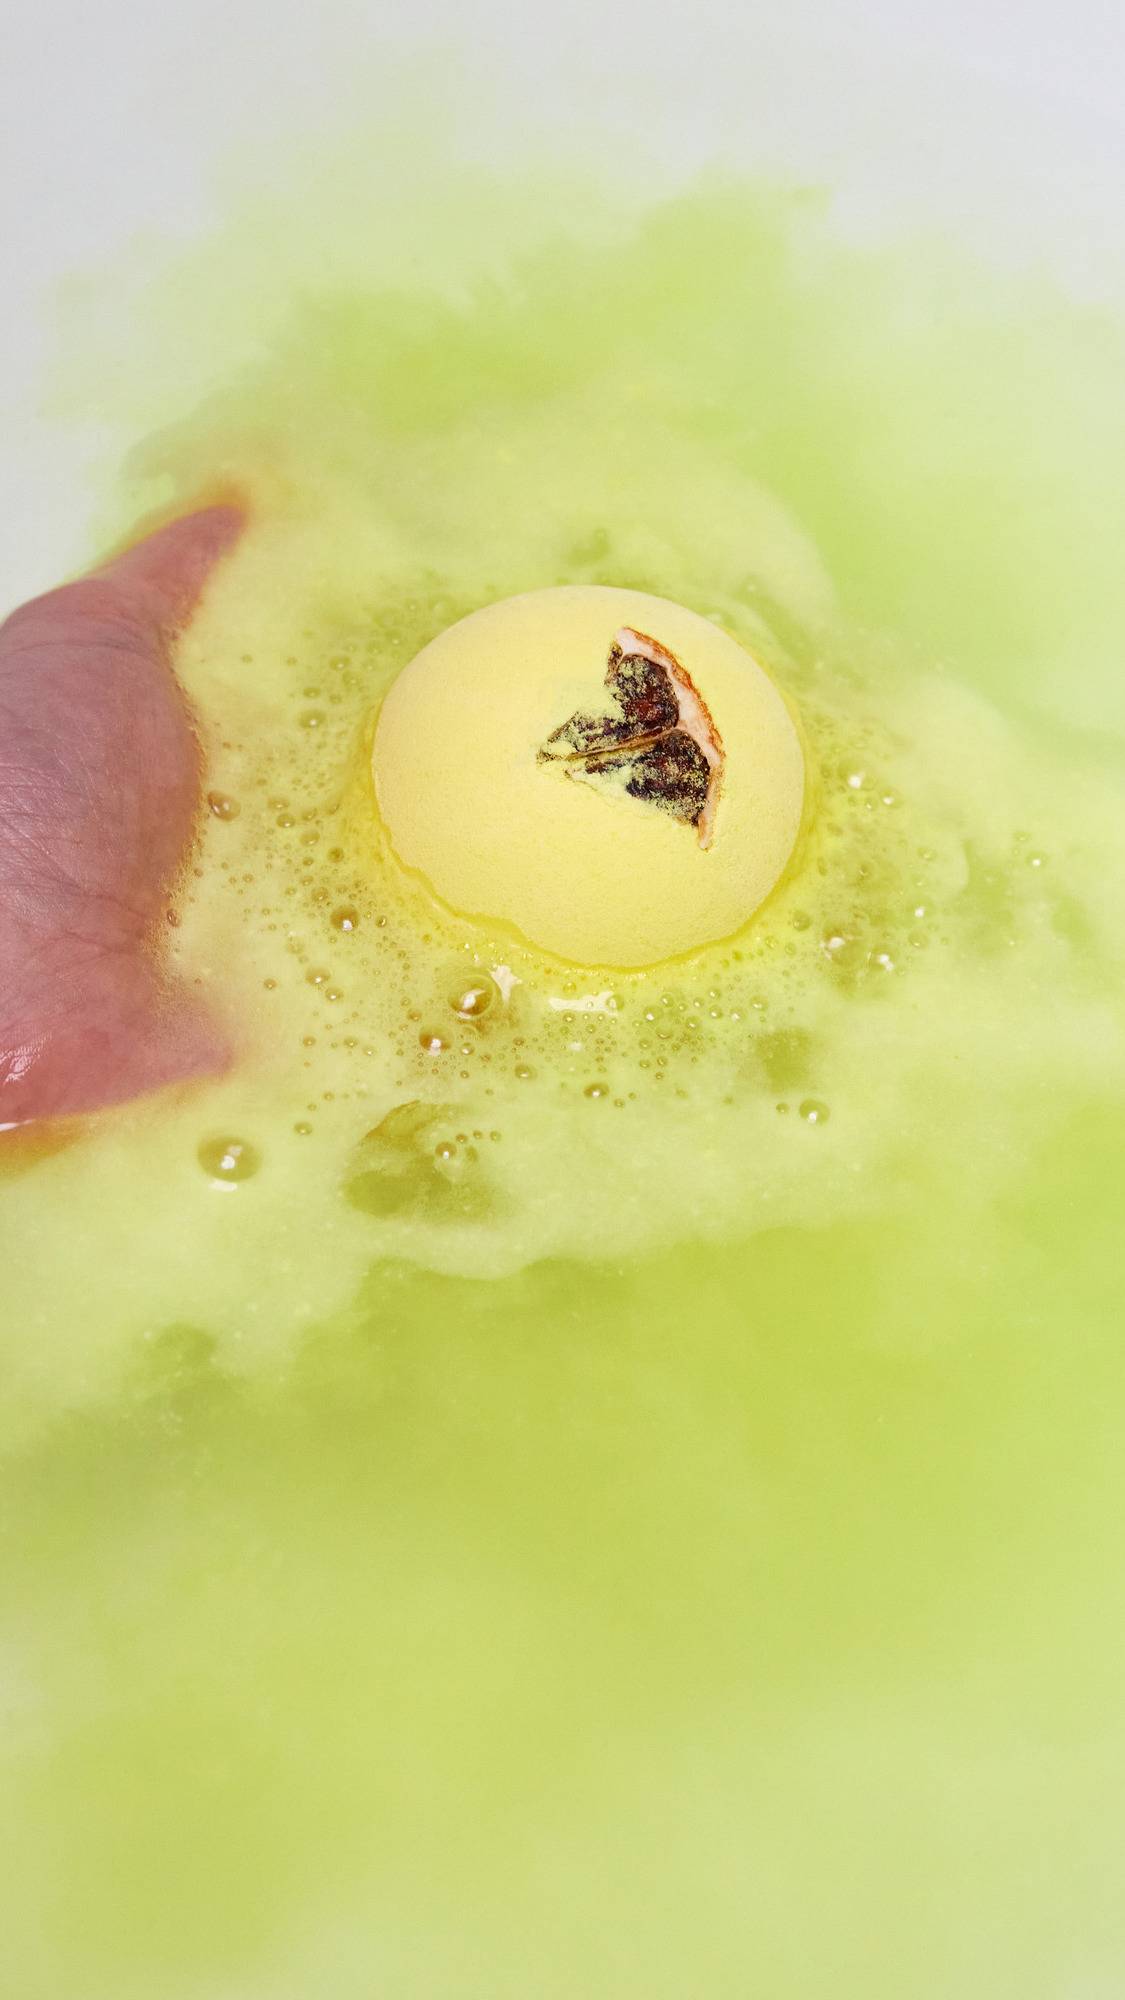 The One With Lemon Oil bath bomb is being gently placed into the bath by the model and is already giving off delicate, velvety, yellow foam across the surface. 